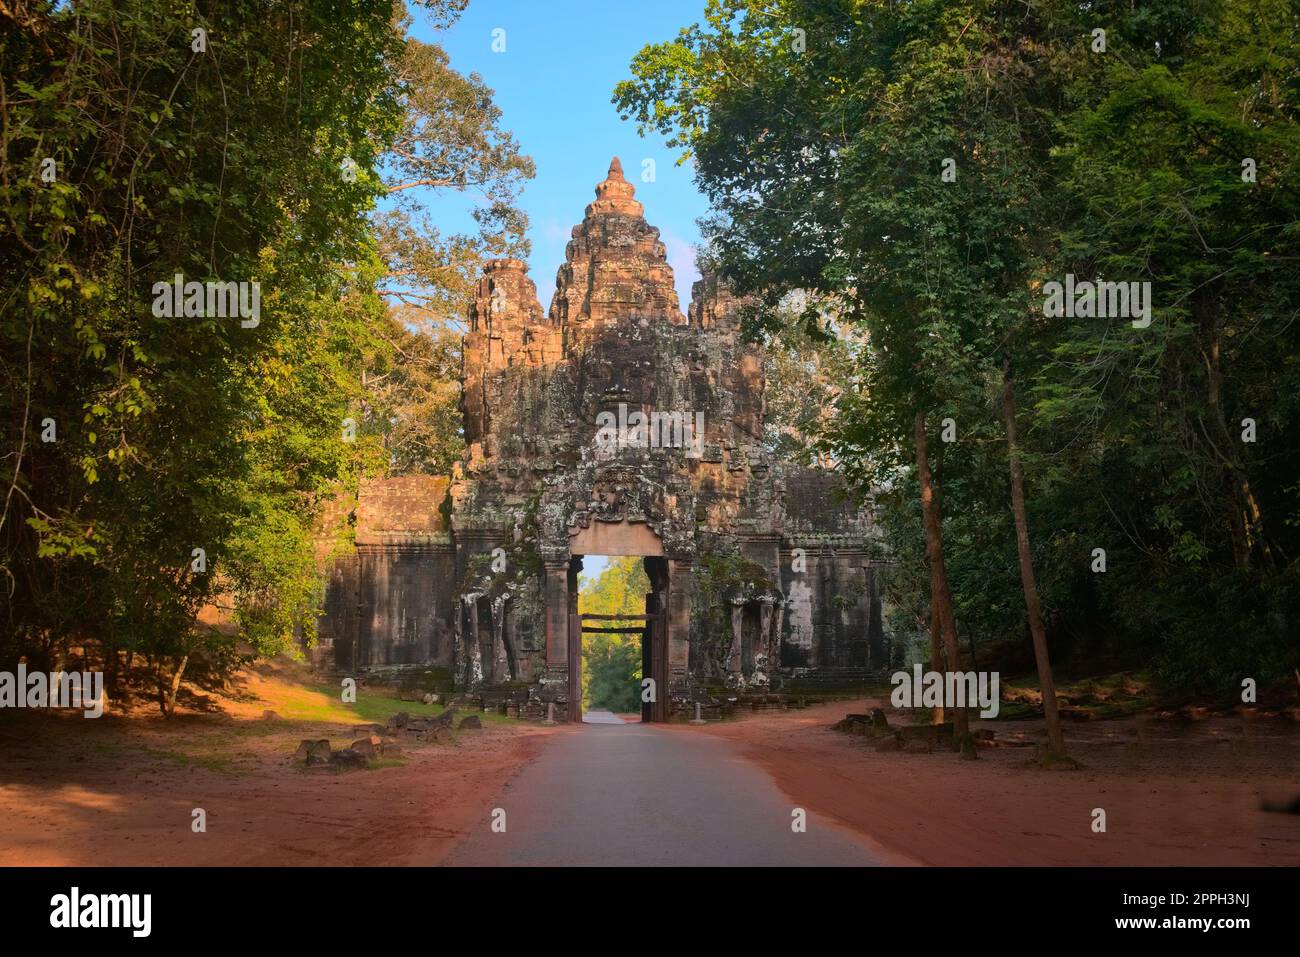 Ancient Cambodian face tower over the northern entrance gate of Angkor Thom city, surrounding Angkor Wat temple complex, in Siem Reap, Cambodia. Stock Photo